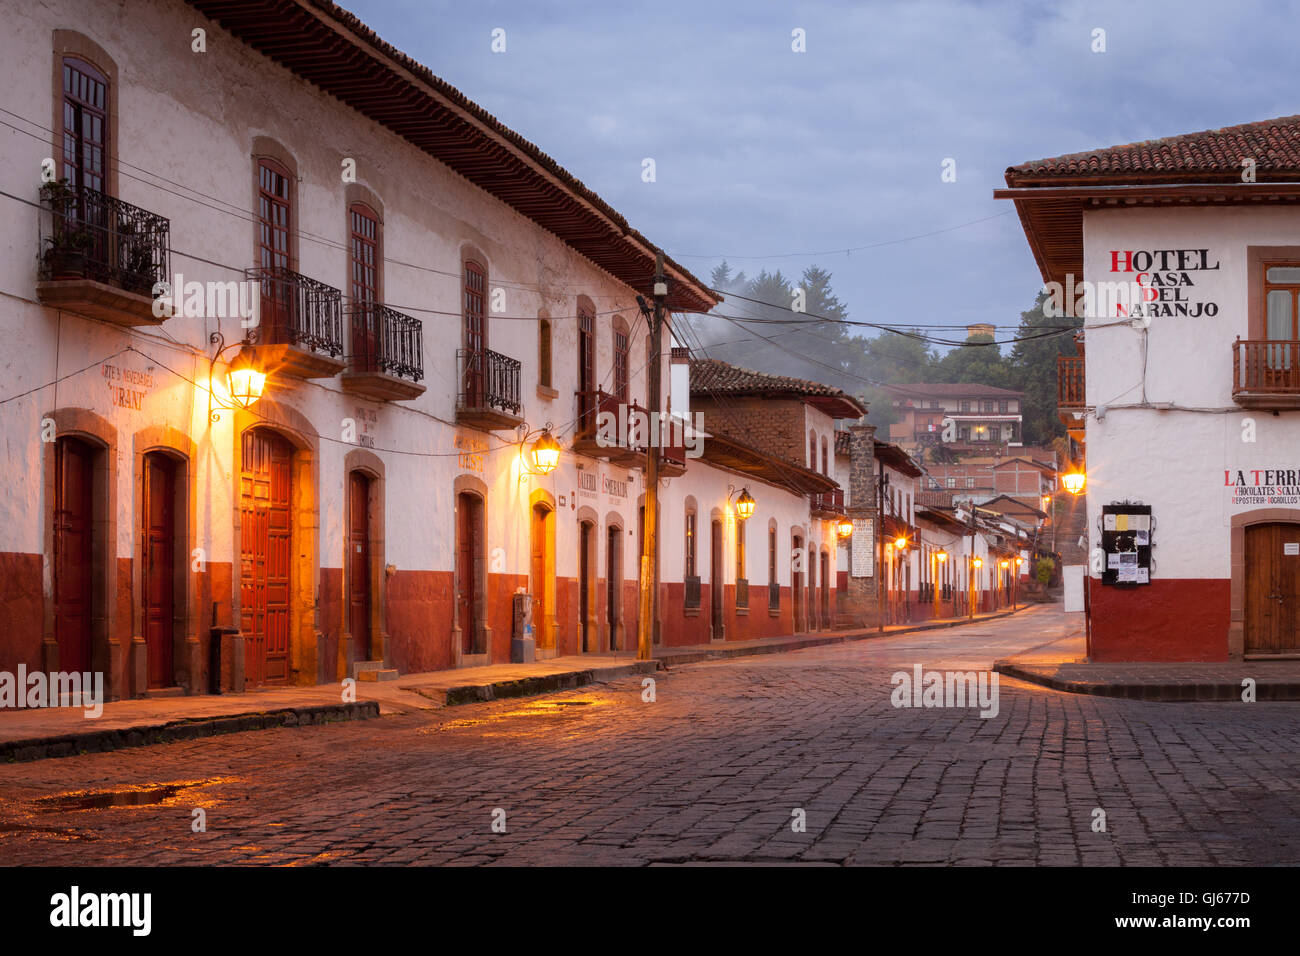 Tranquil street at dawn in the colonial village of Patzcuaro, Michoacan, Mexico. Stock Photo